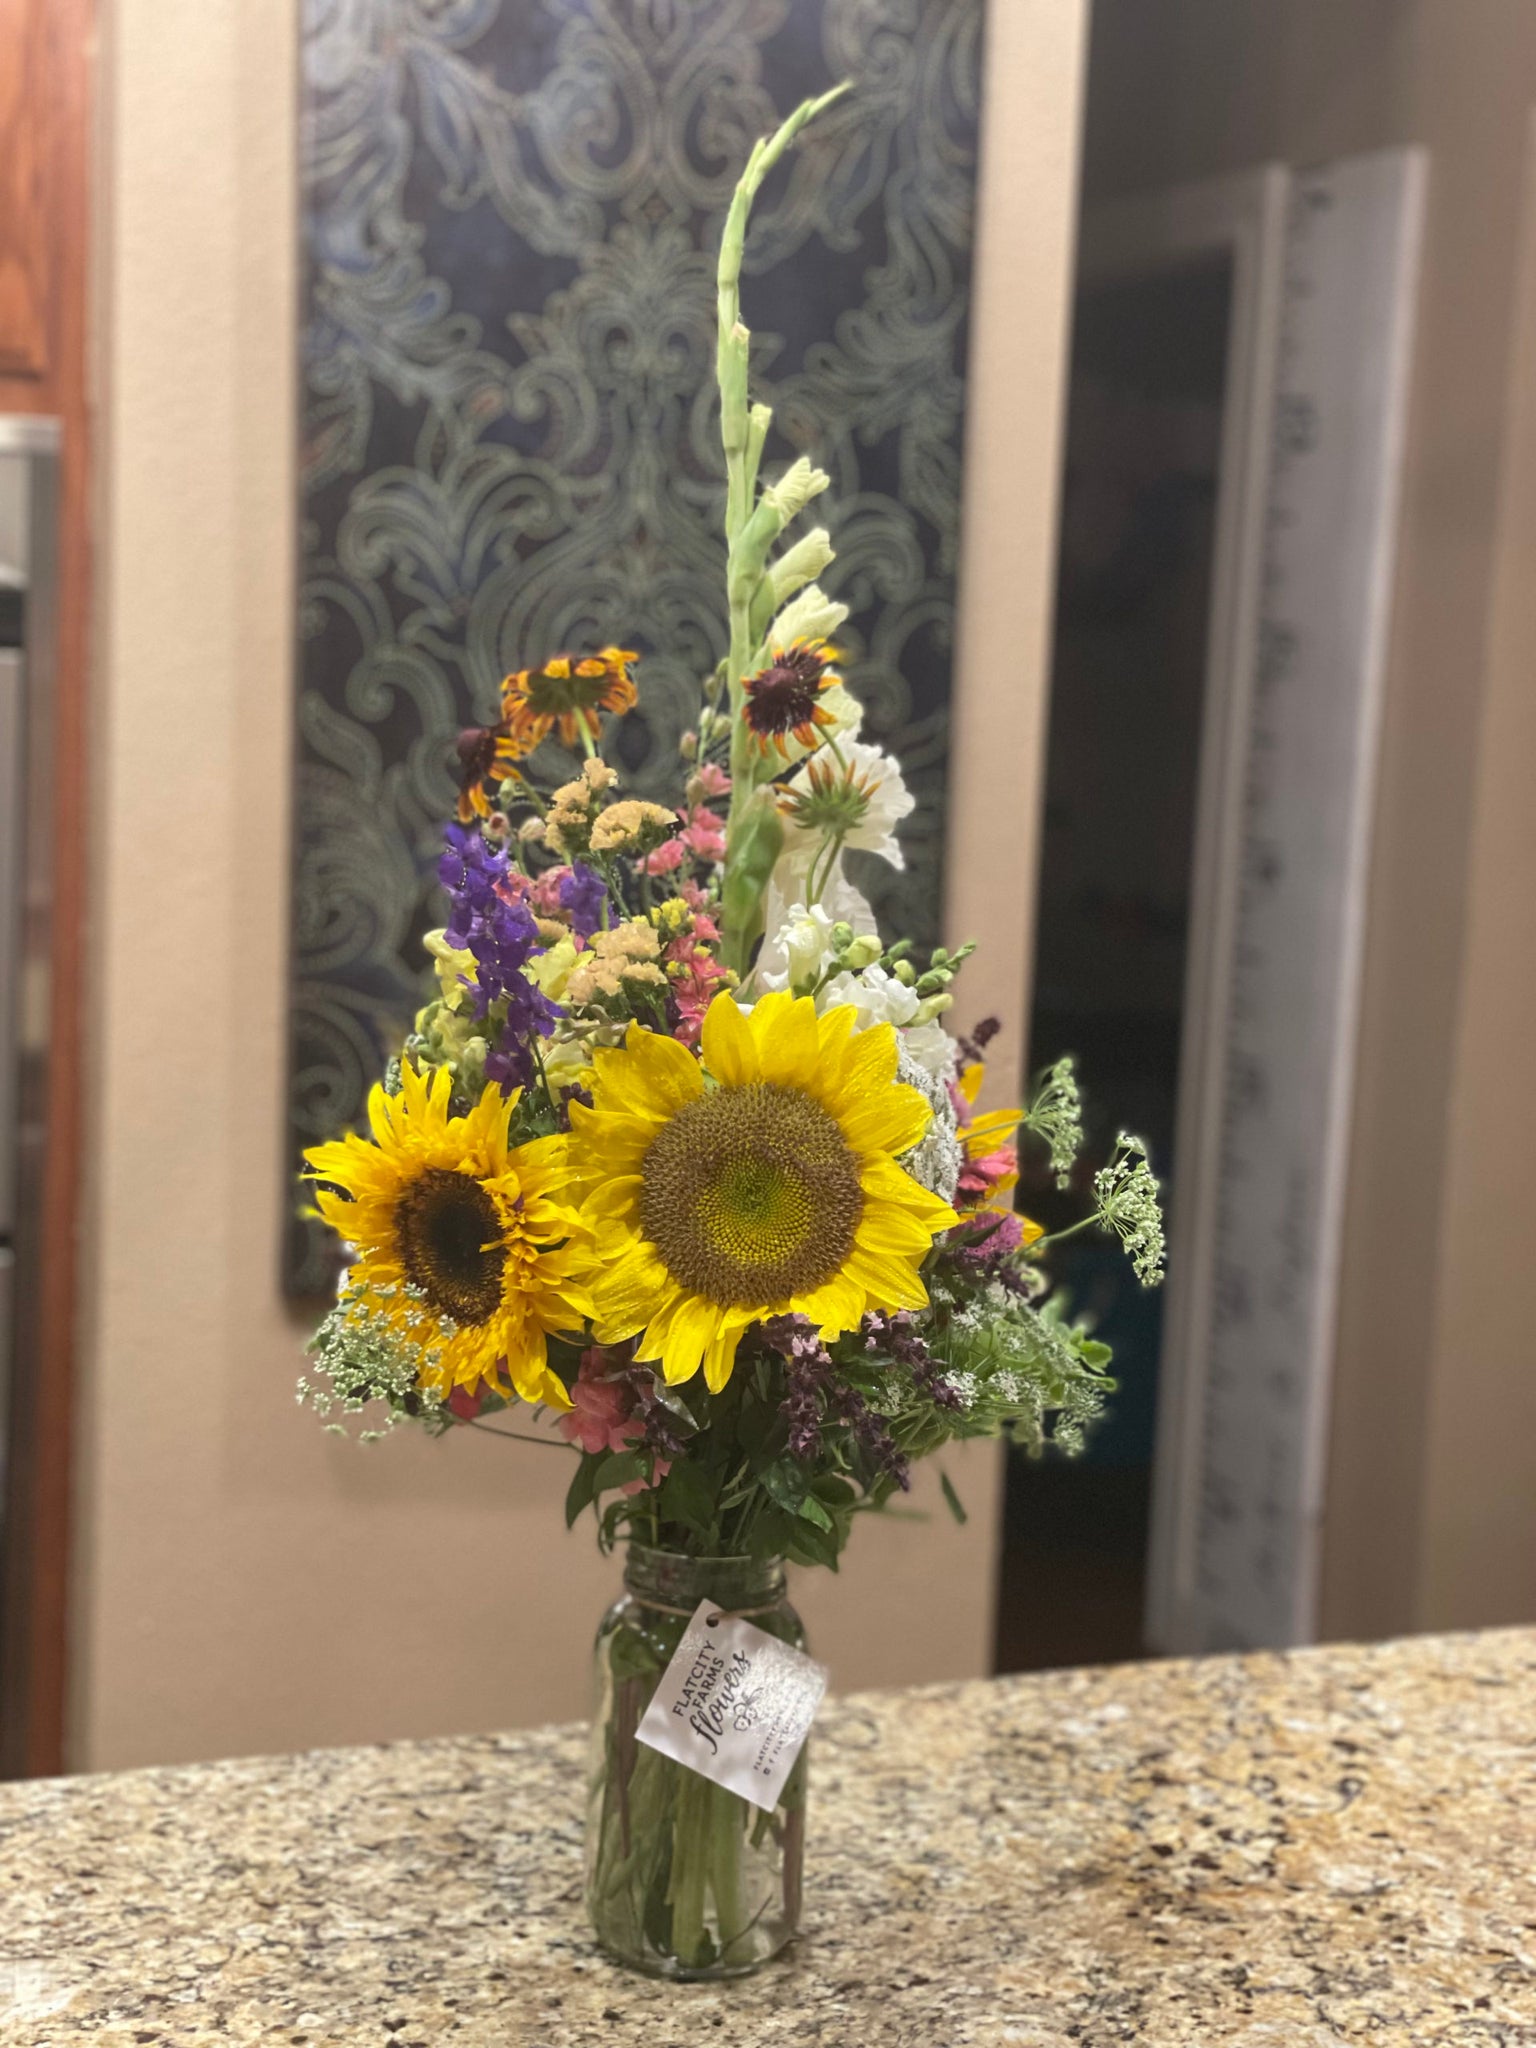 Medium Sized Bouquet - Delivery